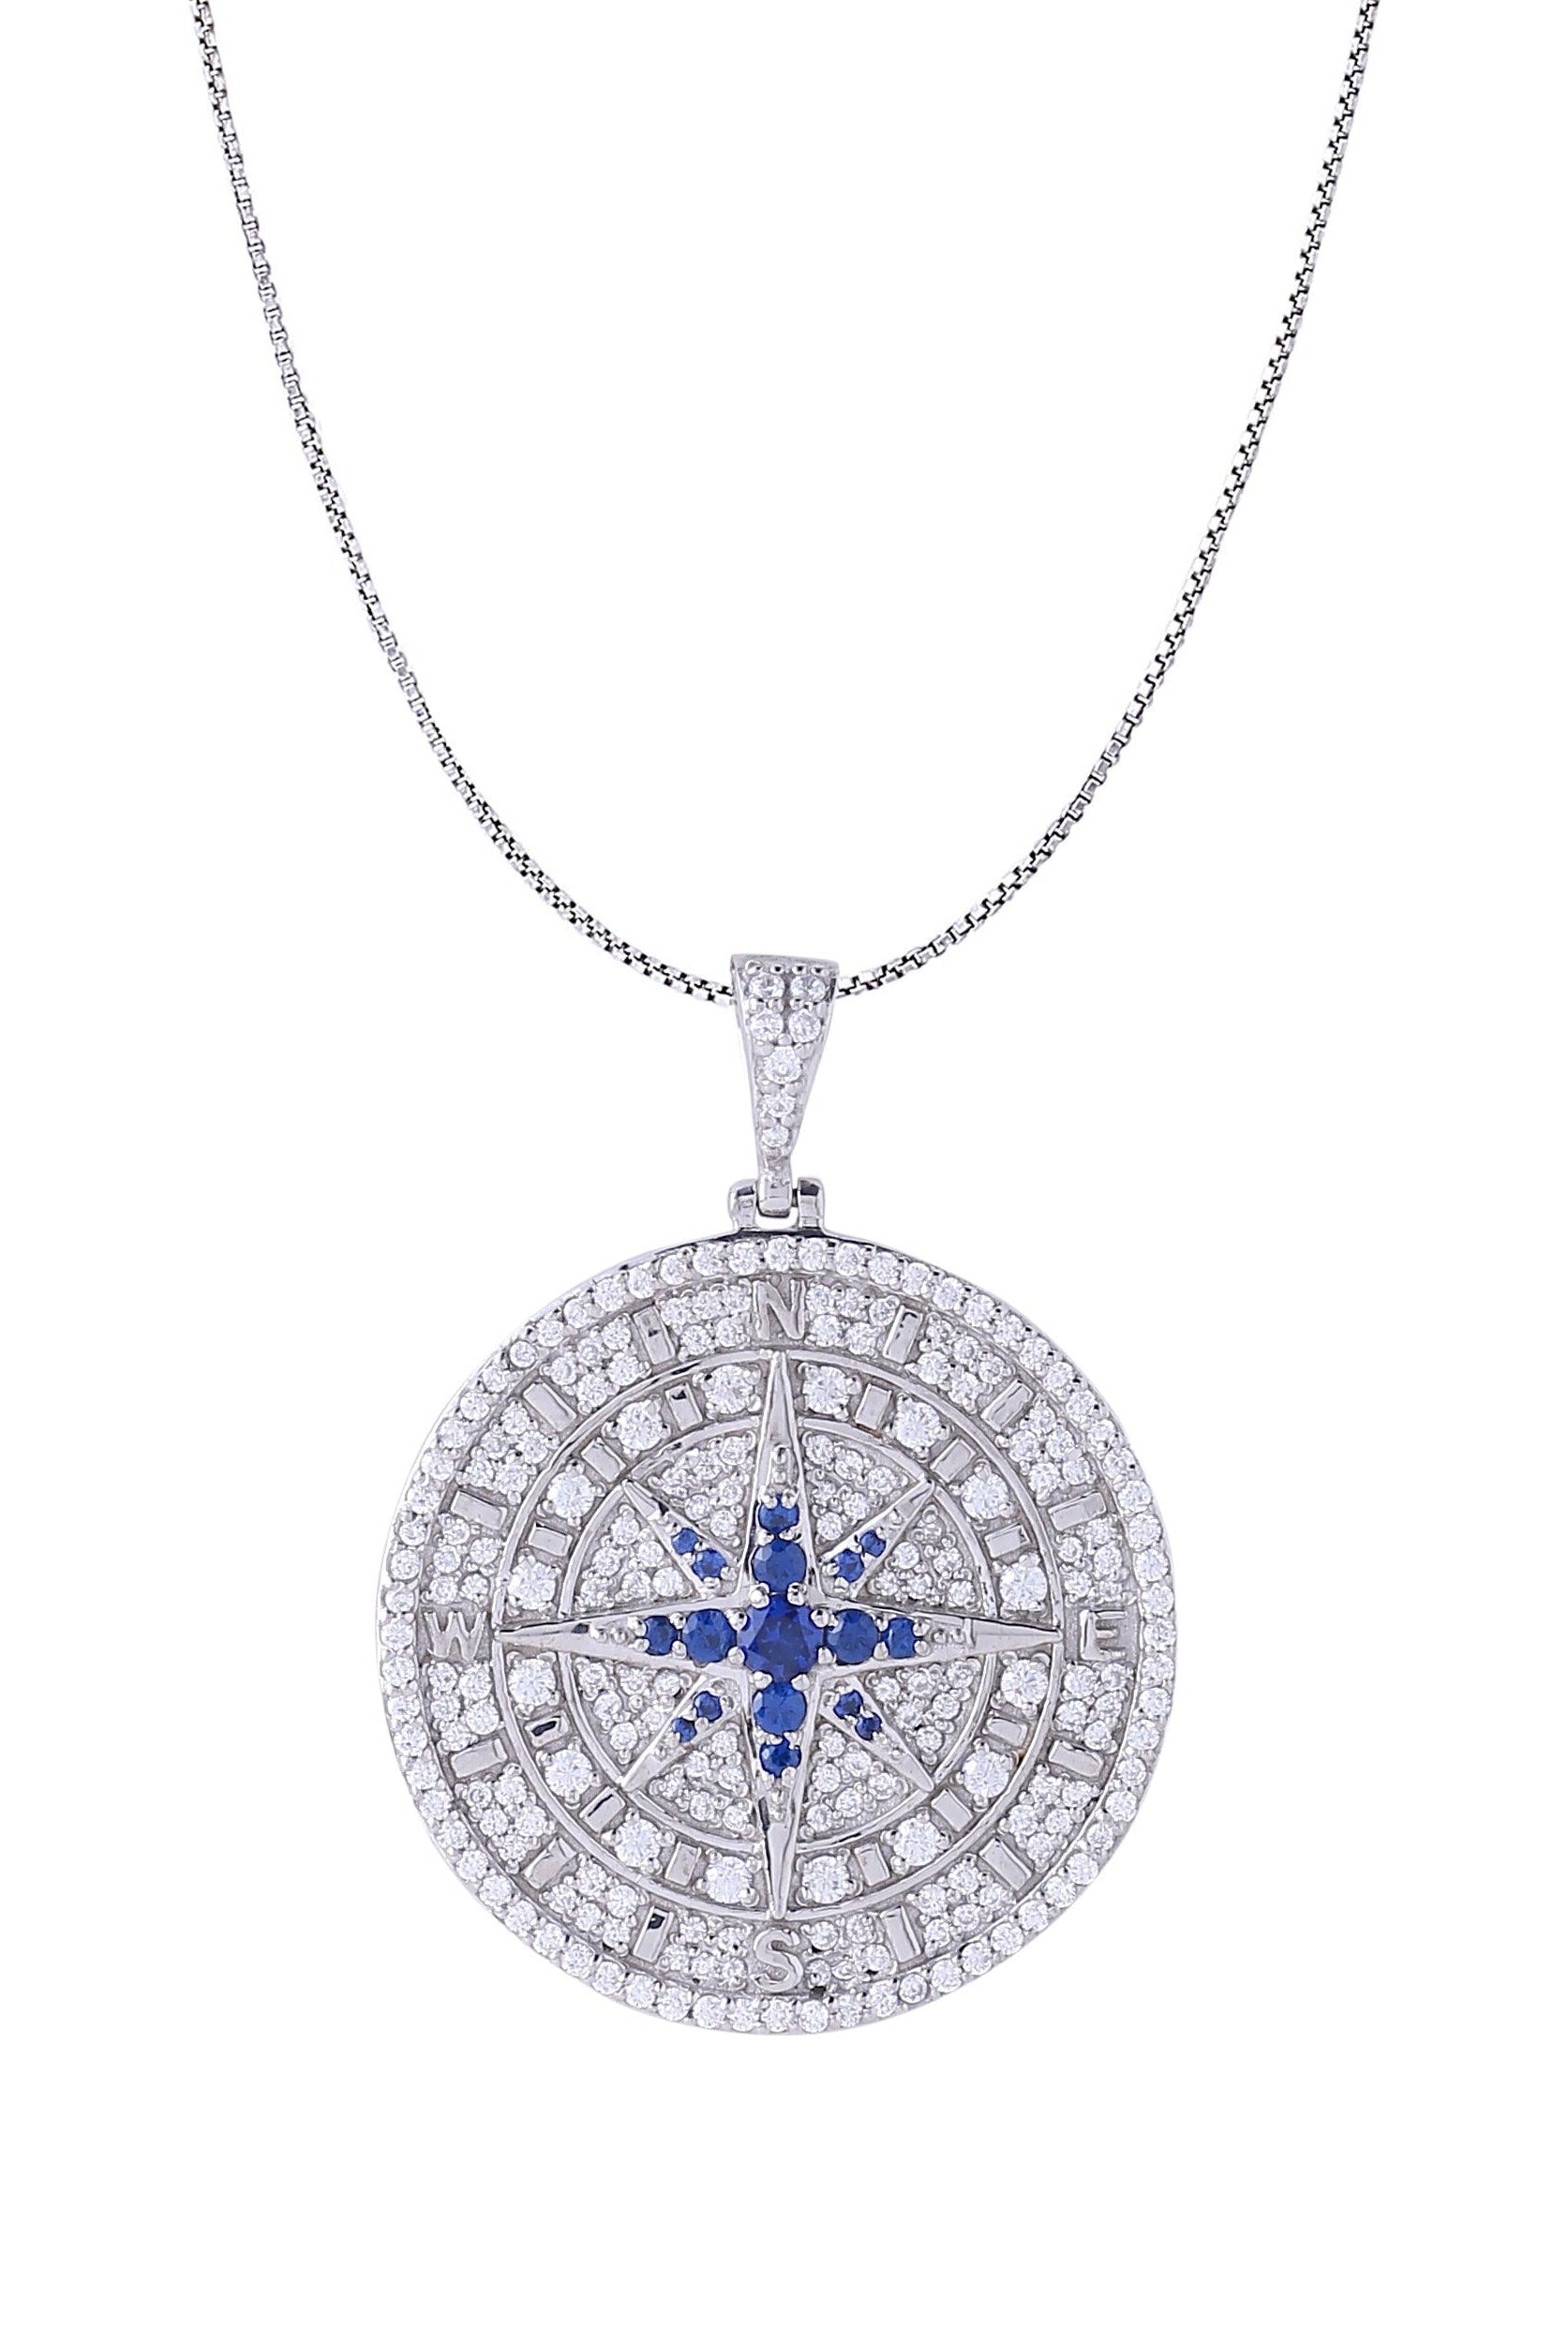 White Gold Color Compass Pendant Made of 925 Sterling Silver Material with 20 Inch Long Silver Chain